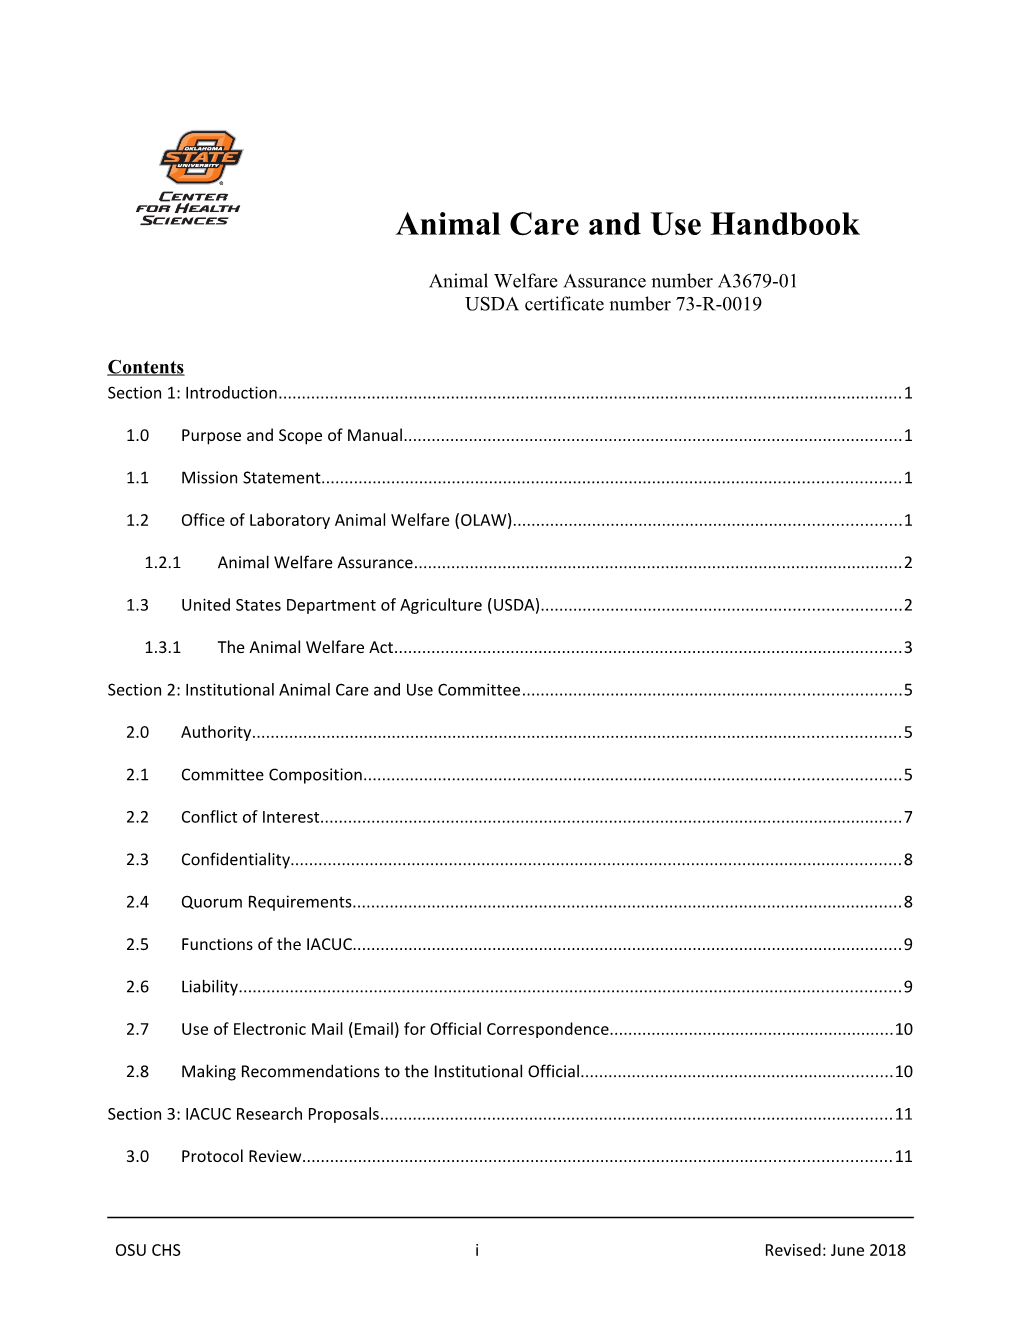 Responsibilities of the Institution S Laboratory Animal Care Programs